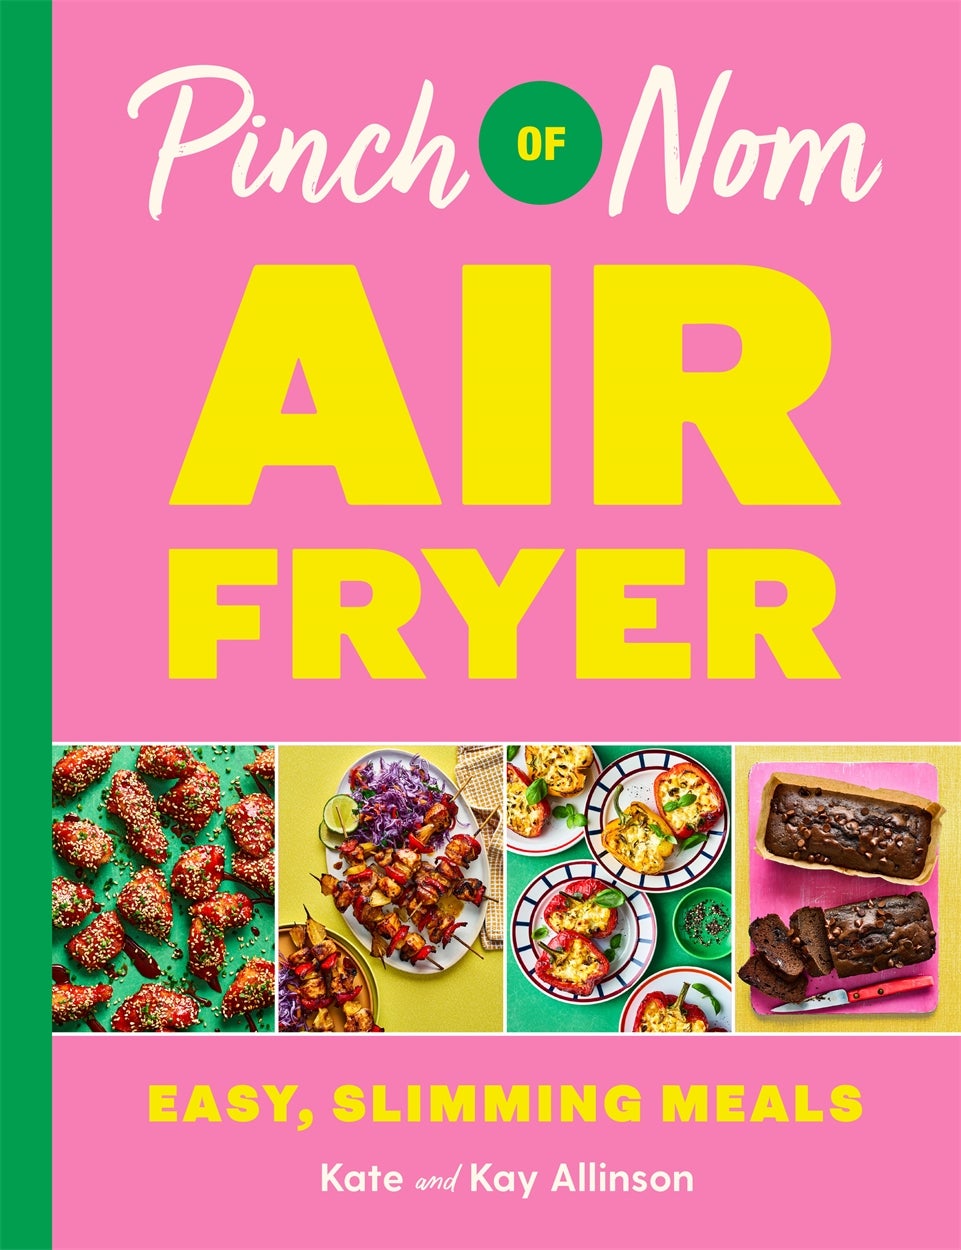 ‘Air Fryer’ is the Pinch of Nom duo’s most requested cookbook to date